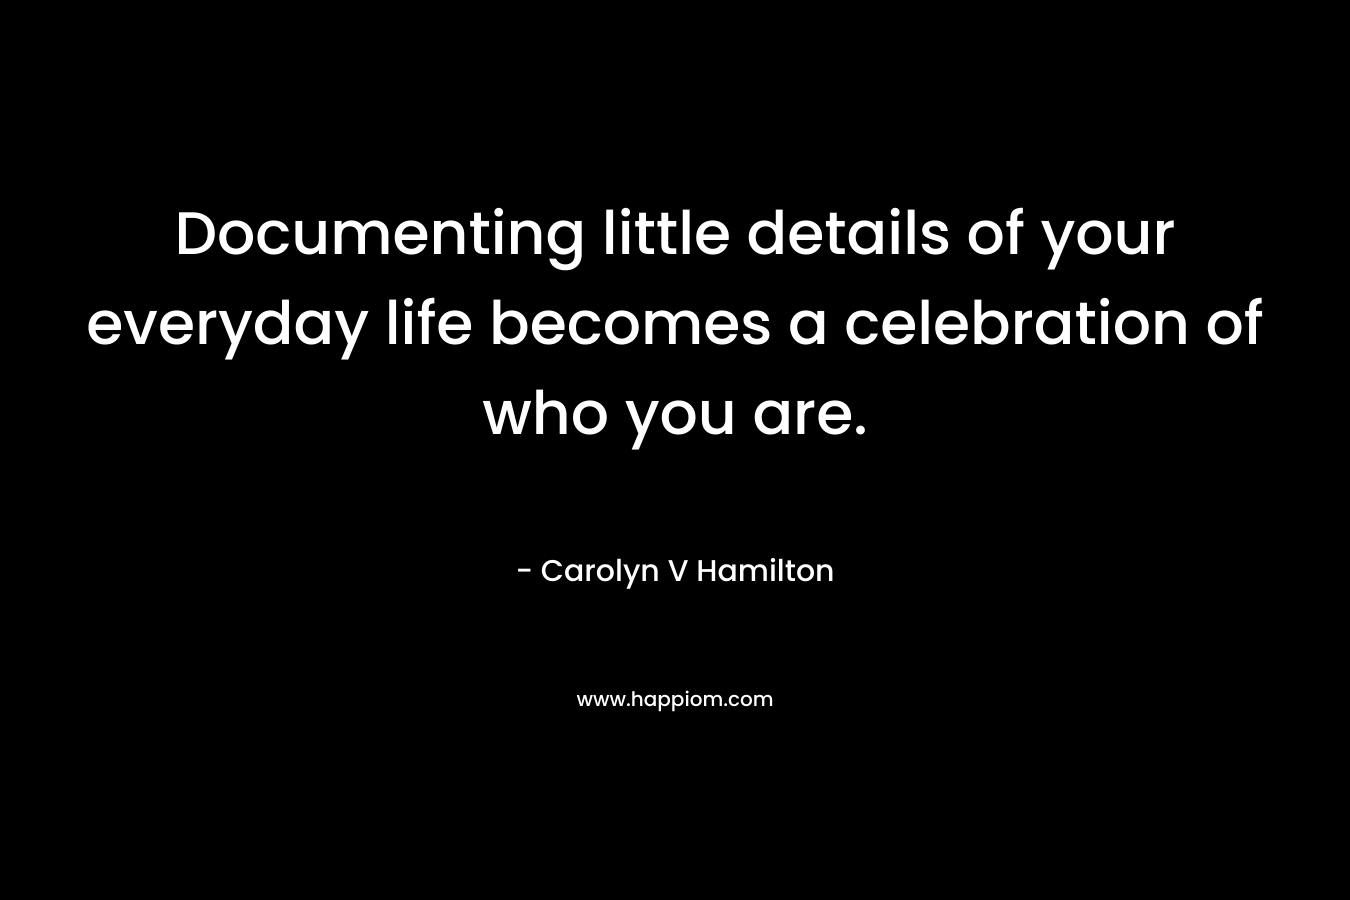 Documenting little details of your everyday life becomes a celebration of who you are.